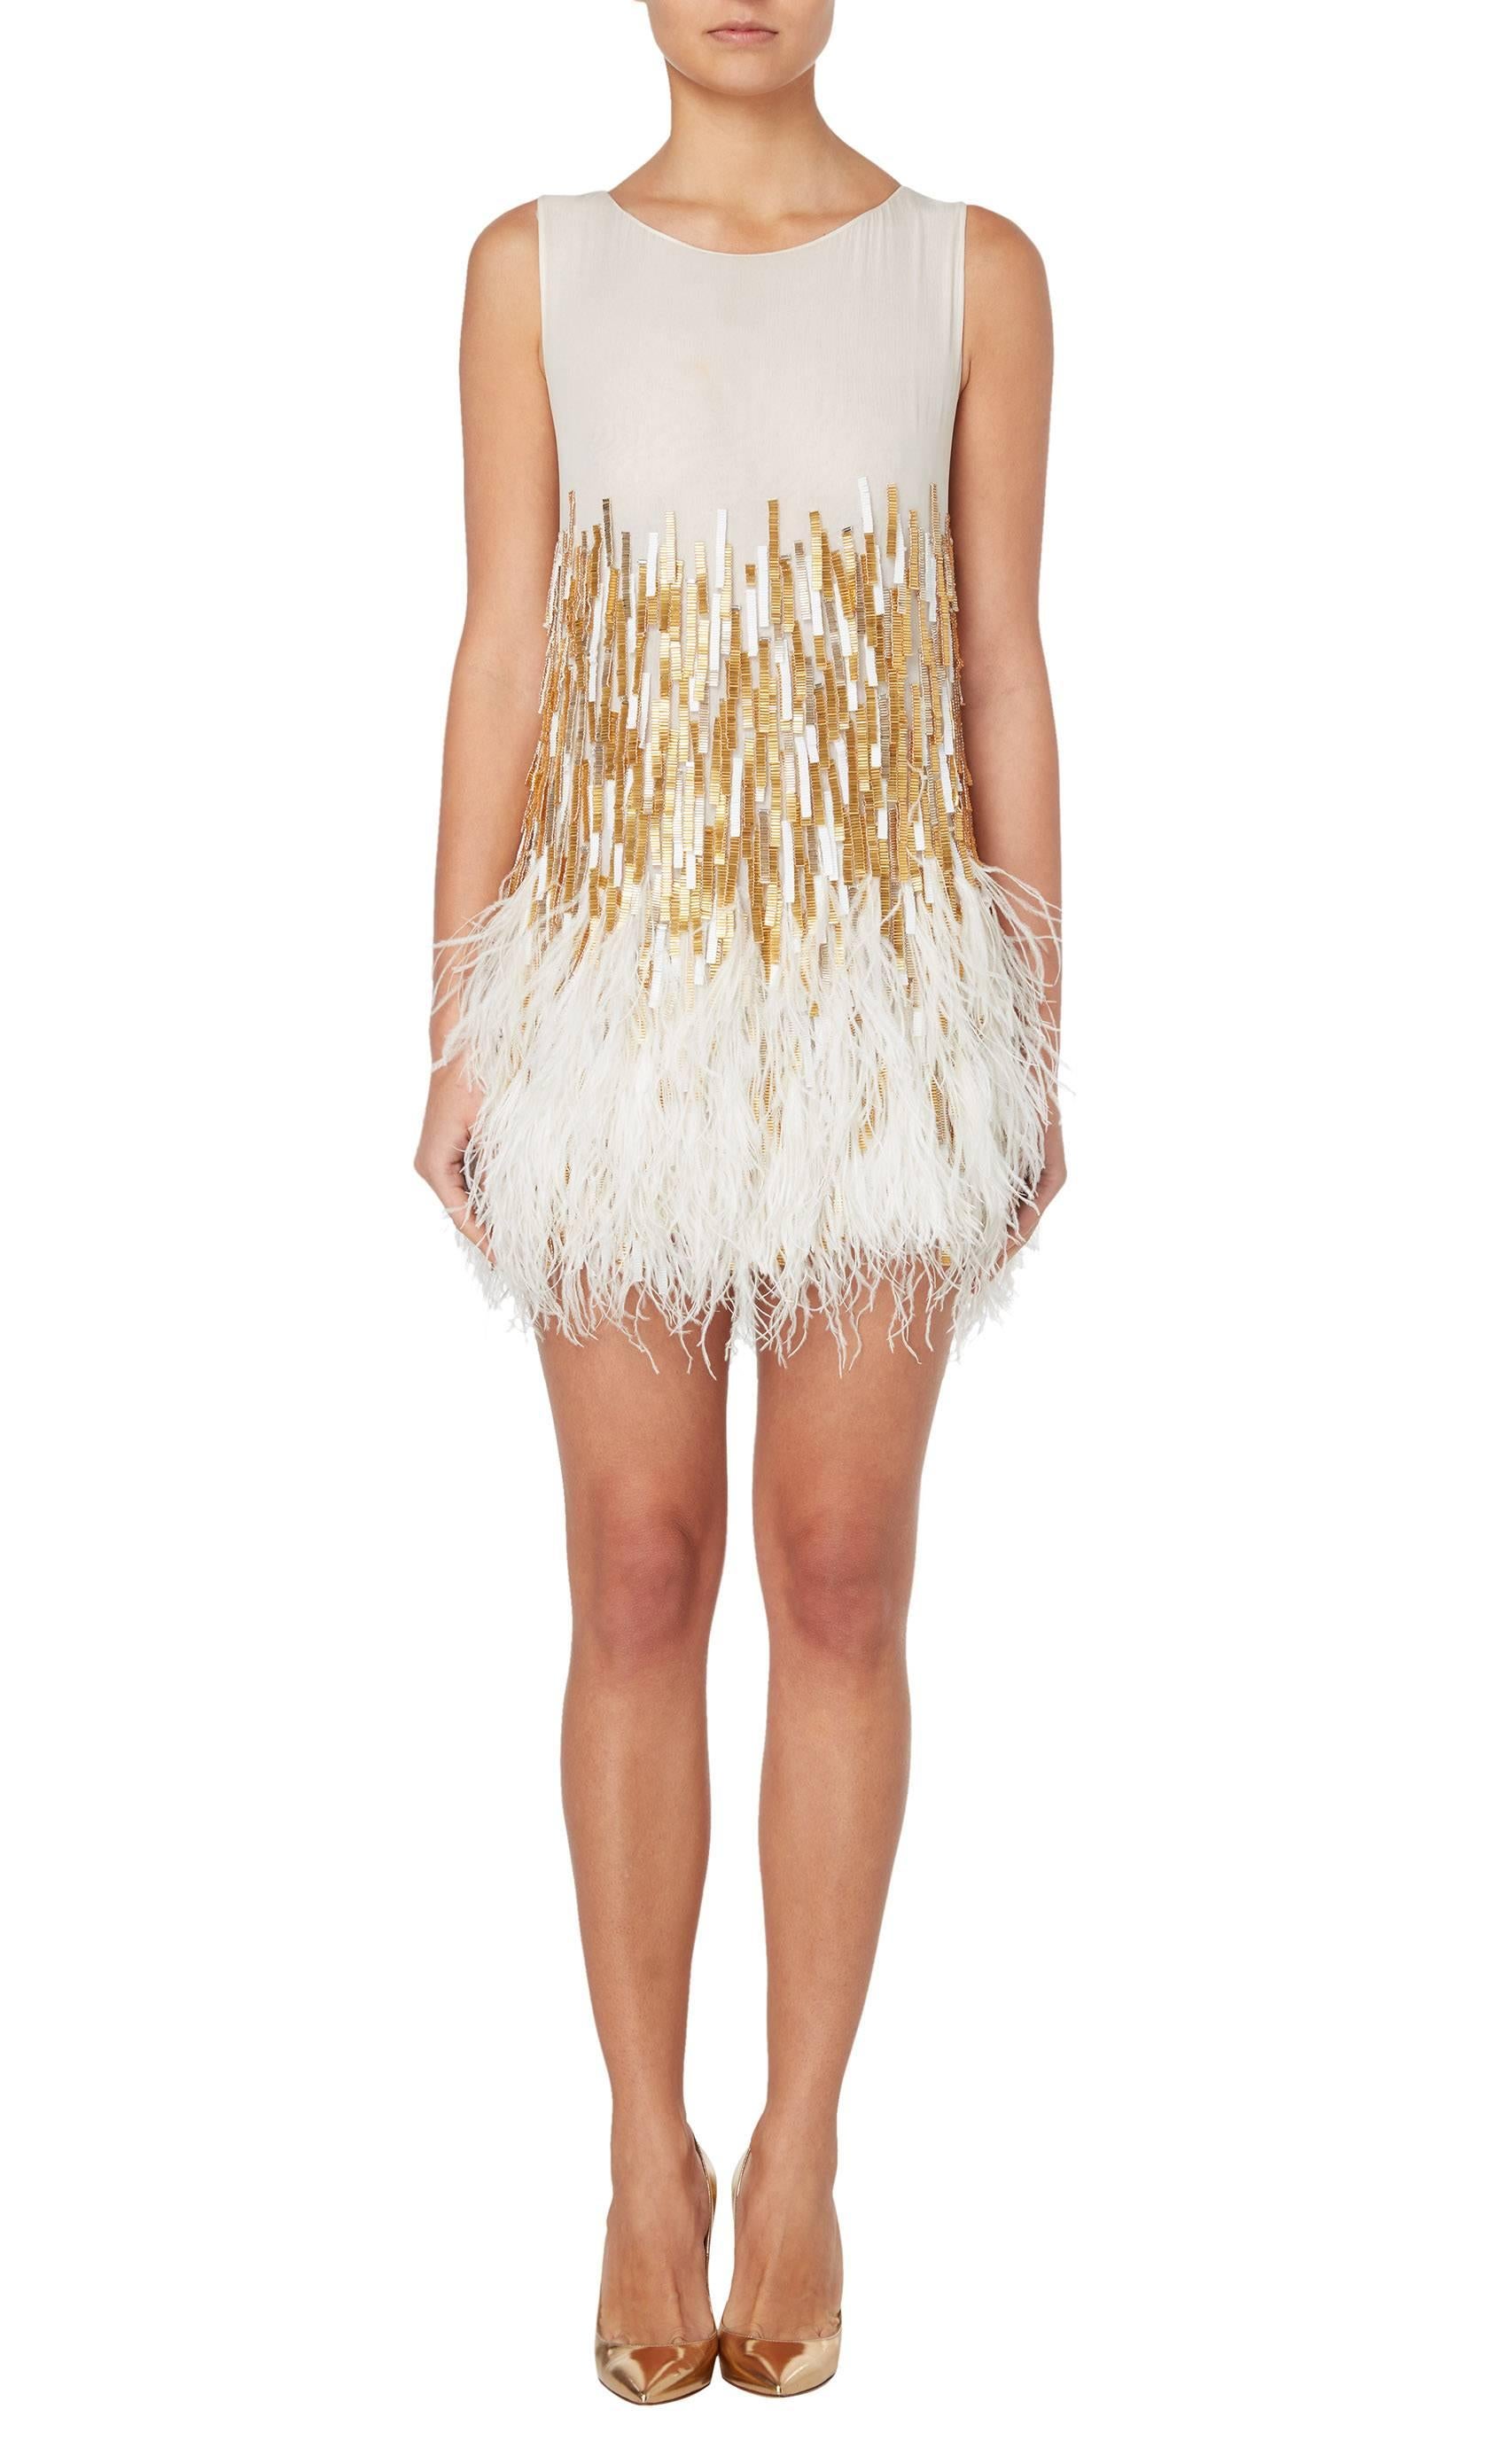 White sheer dress with gold an white beaded tassels and white ostrich feathers at hem.